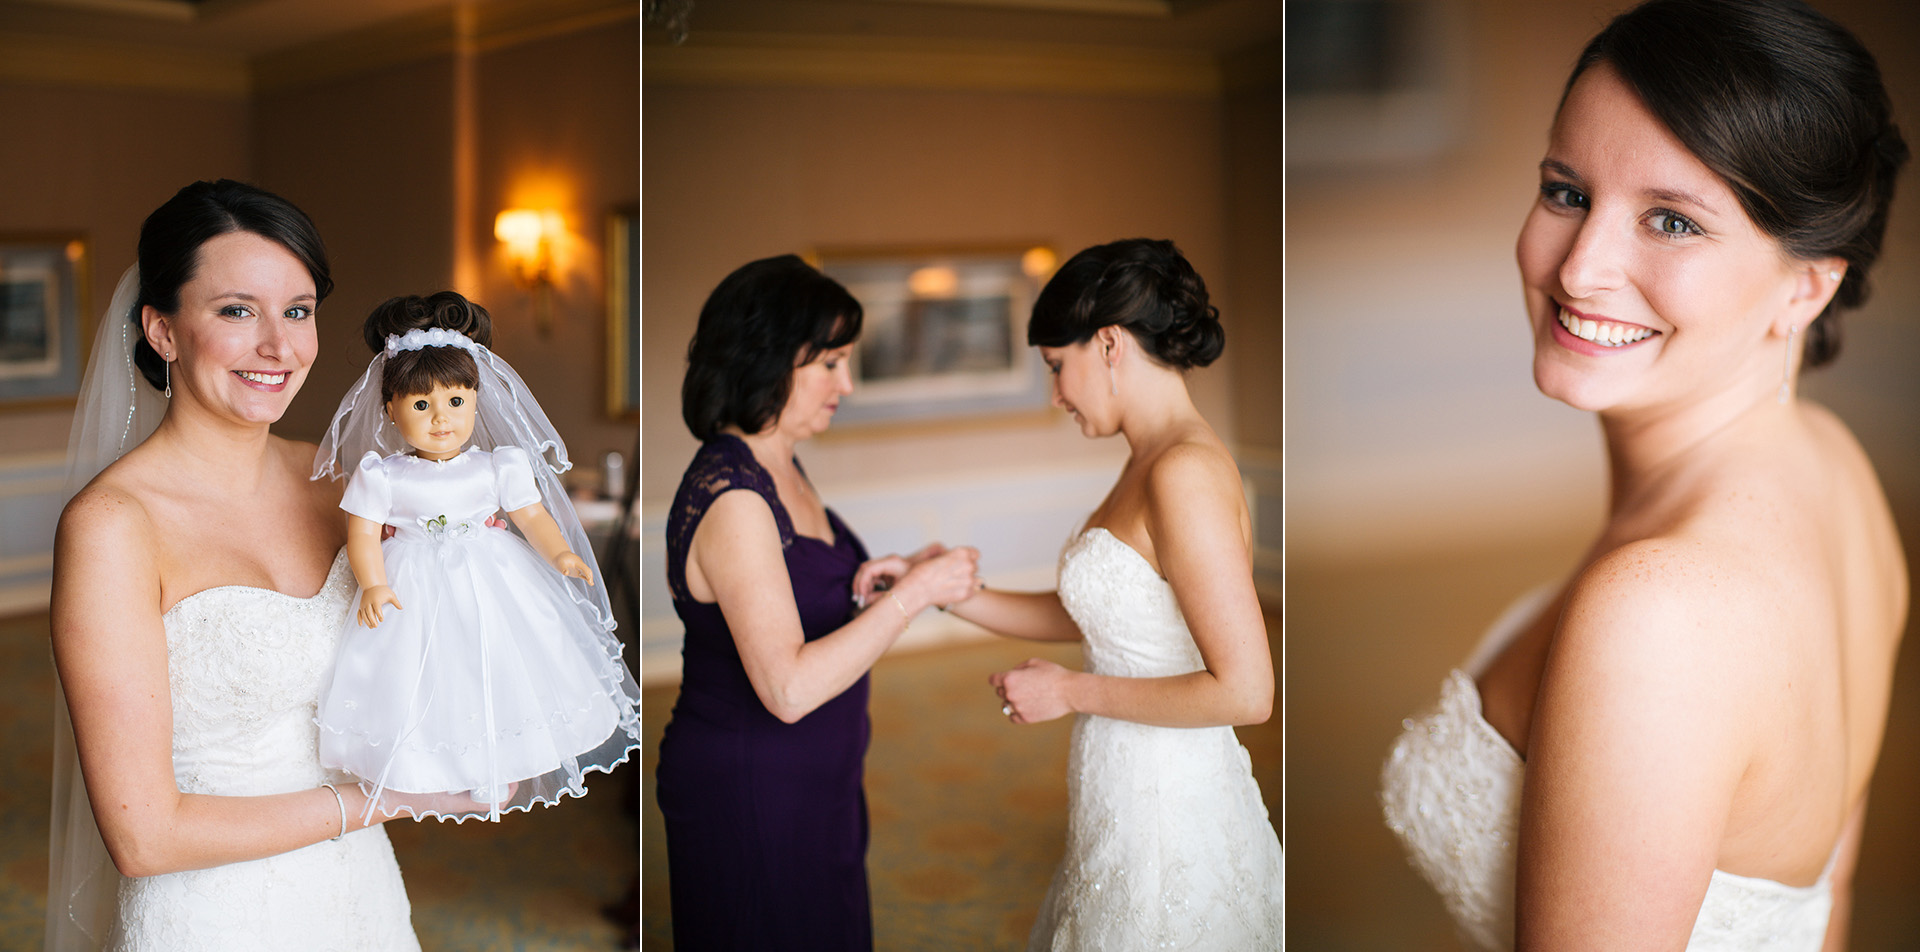 Cleveland Wedding at the Ritz Carlton Hotel - Too Much Awesomeness Photographer 06.jpg